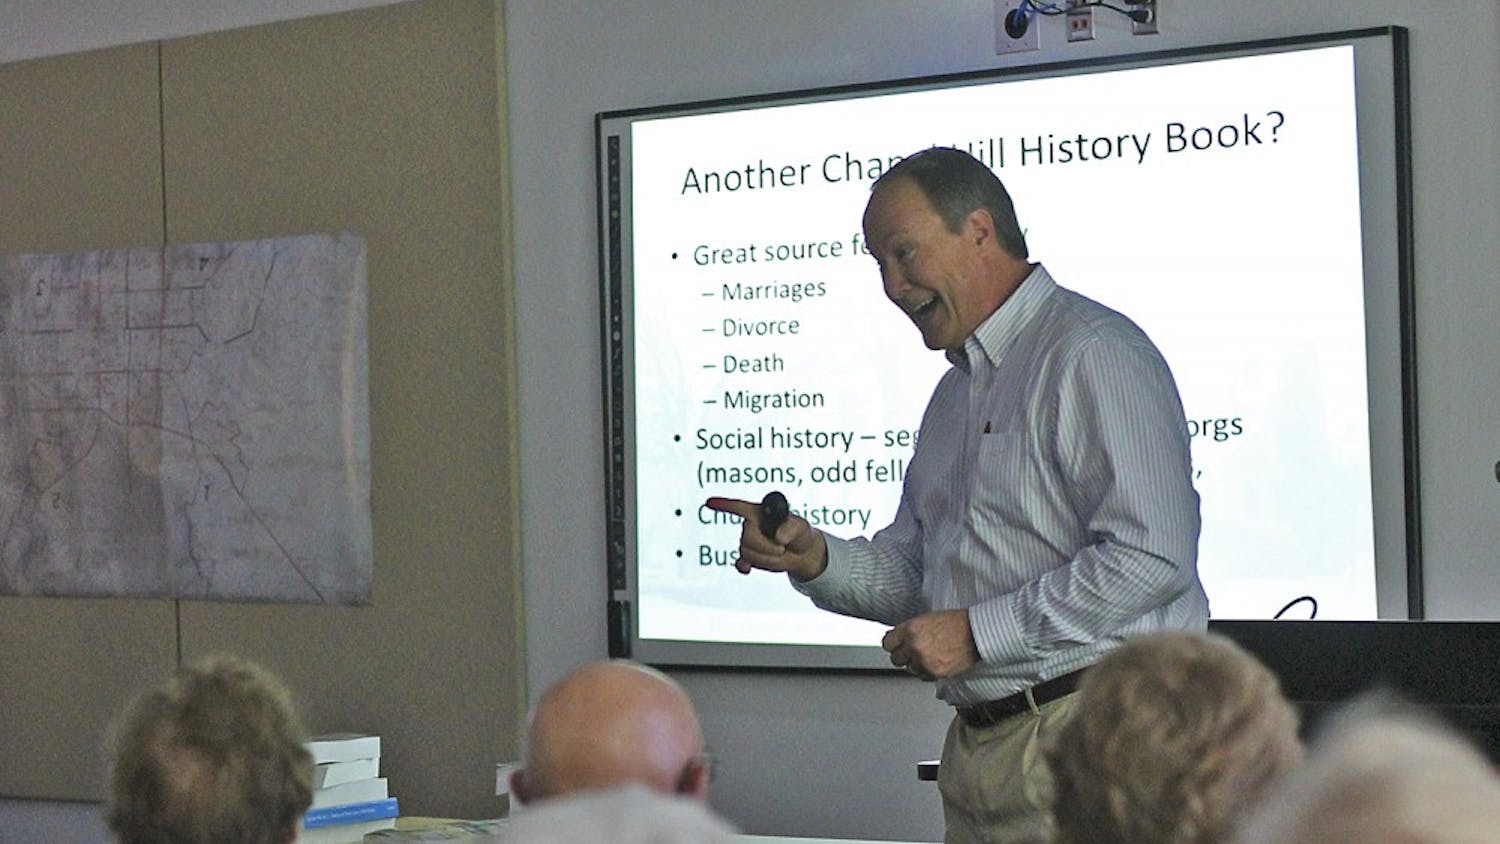 Author Stuart Dunaway presents "A Historical Overview of the Village of Chapel Hill" to a packed room in the Chapel Hill Public Library on Sunday afternoon.